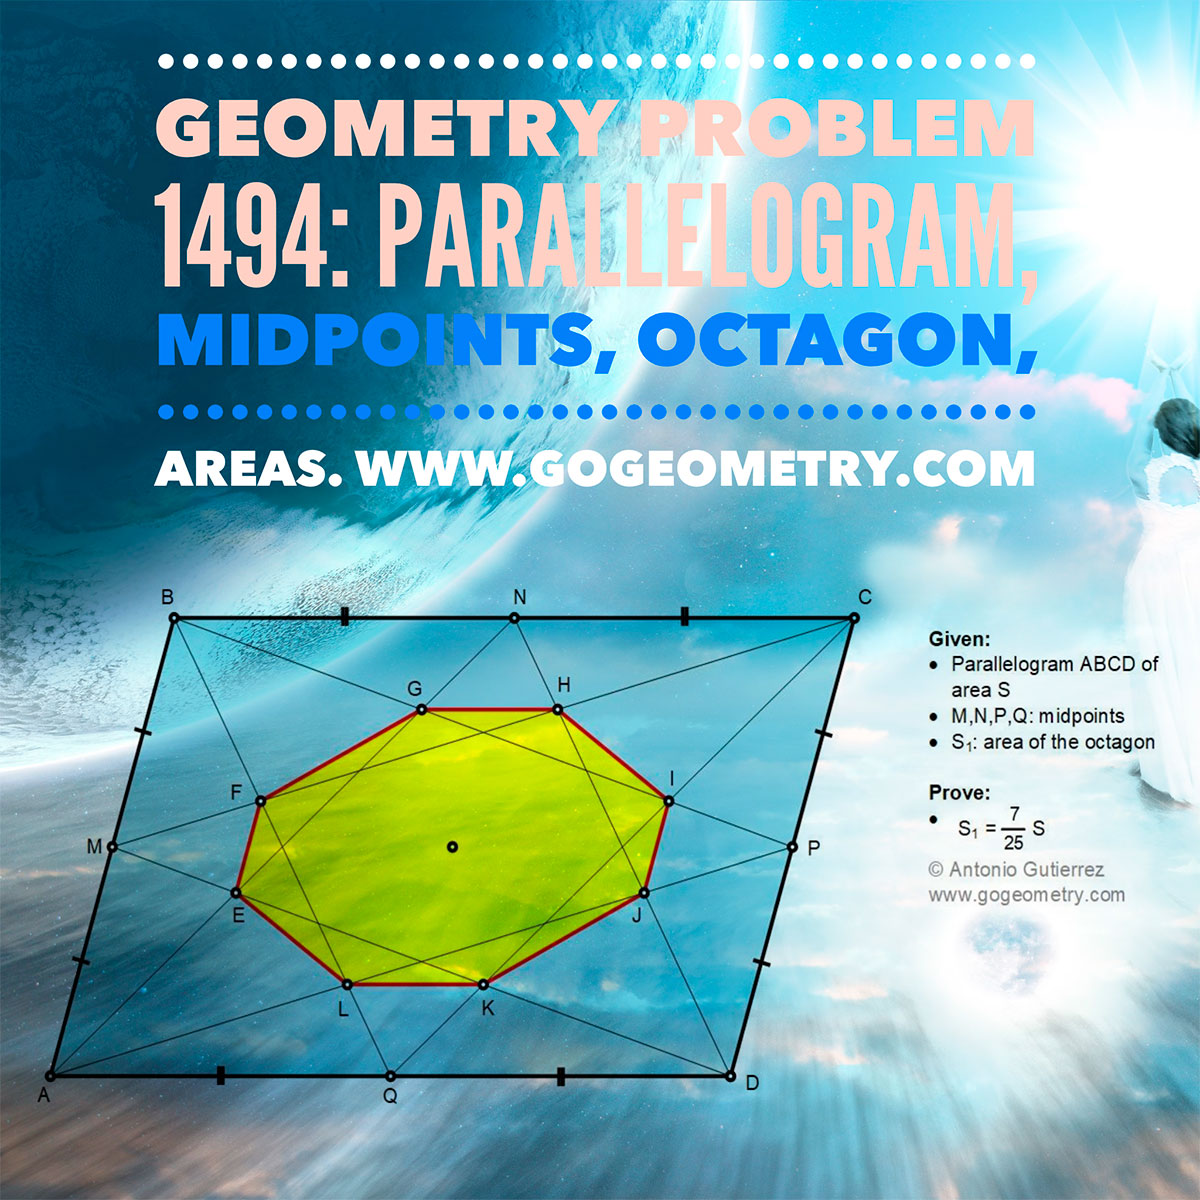 Geometry Problem 1494: Parallelogram, Midpoints, Octagon, Areas